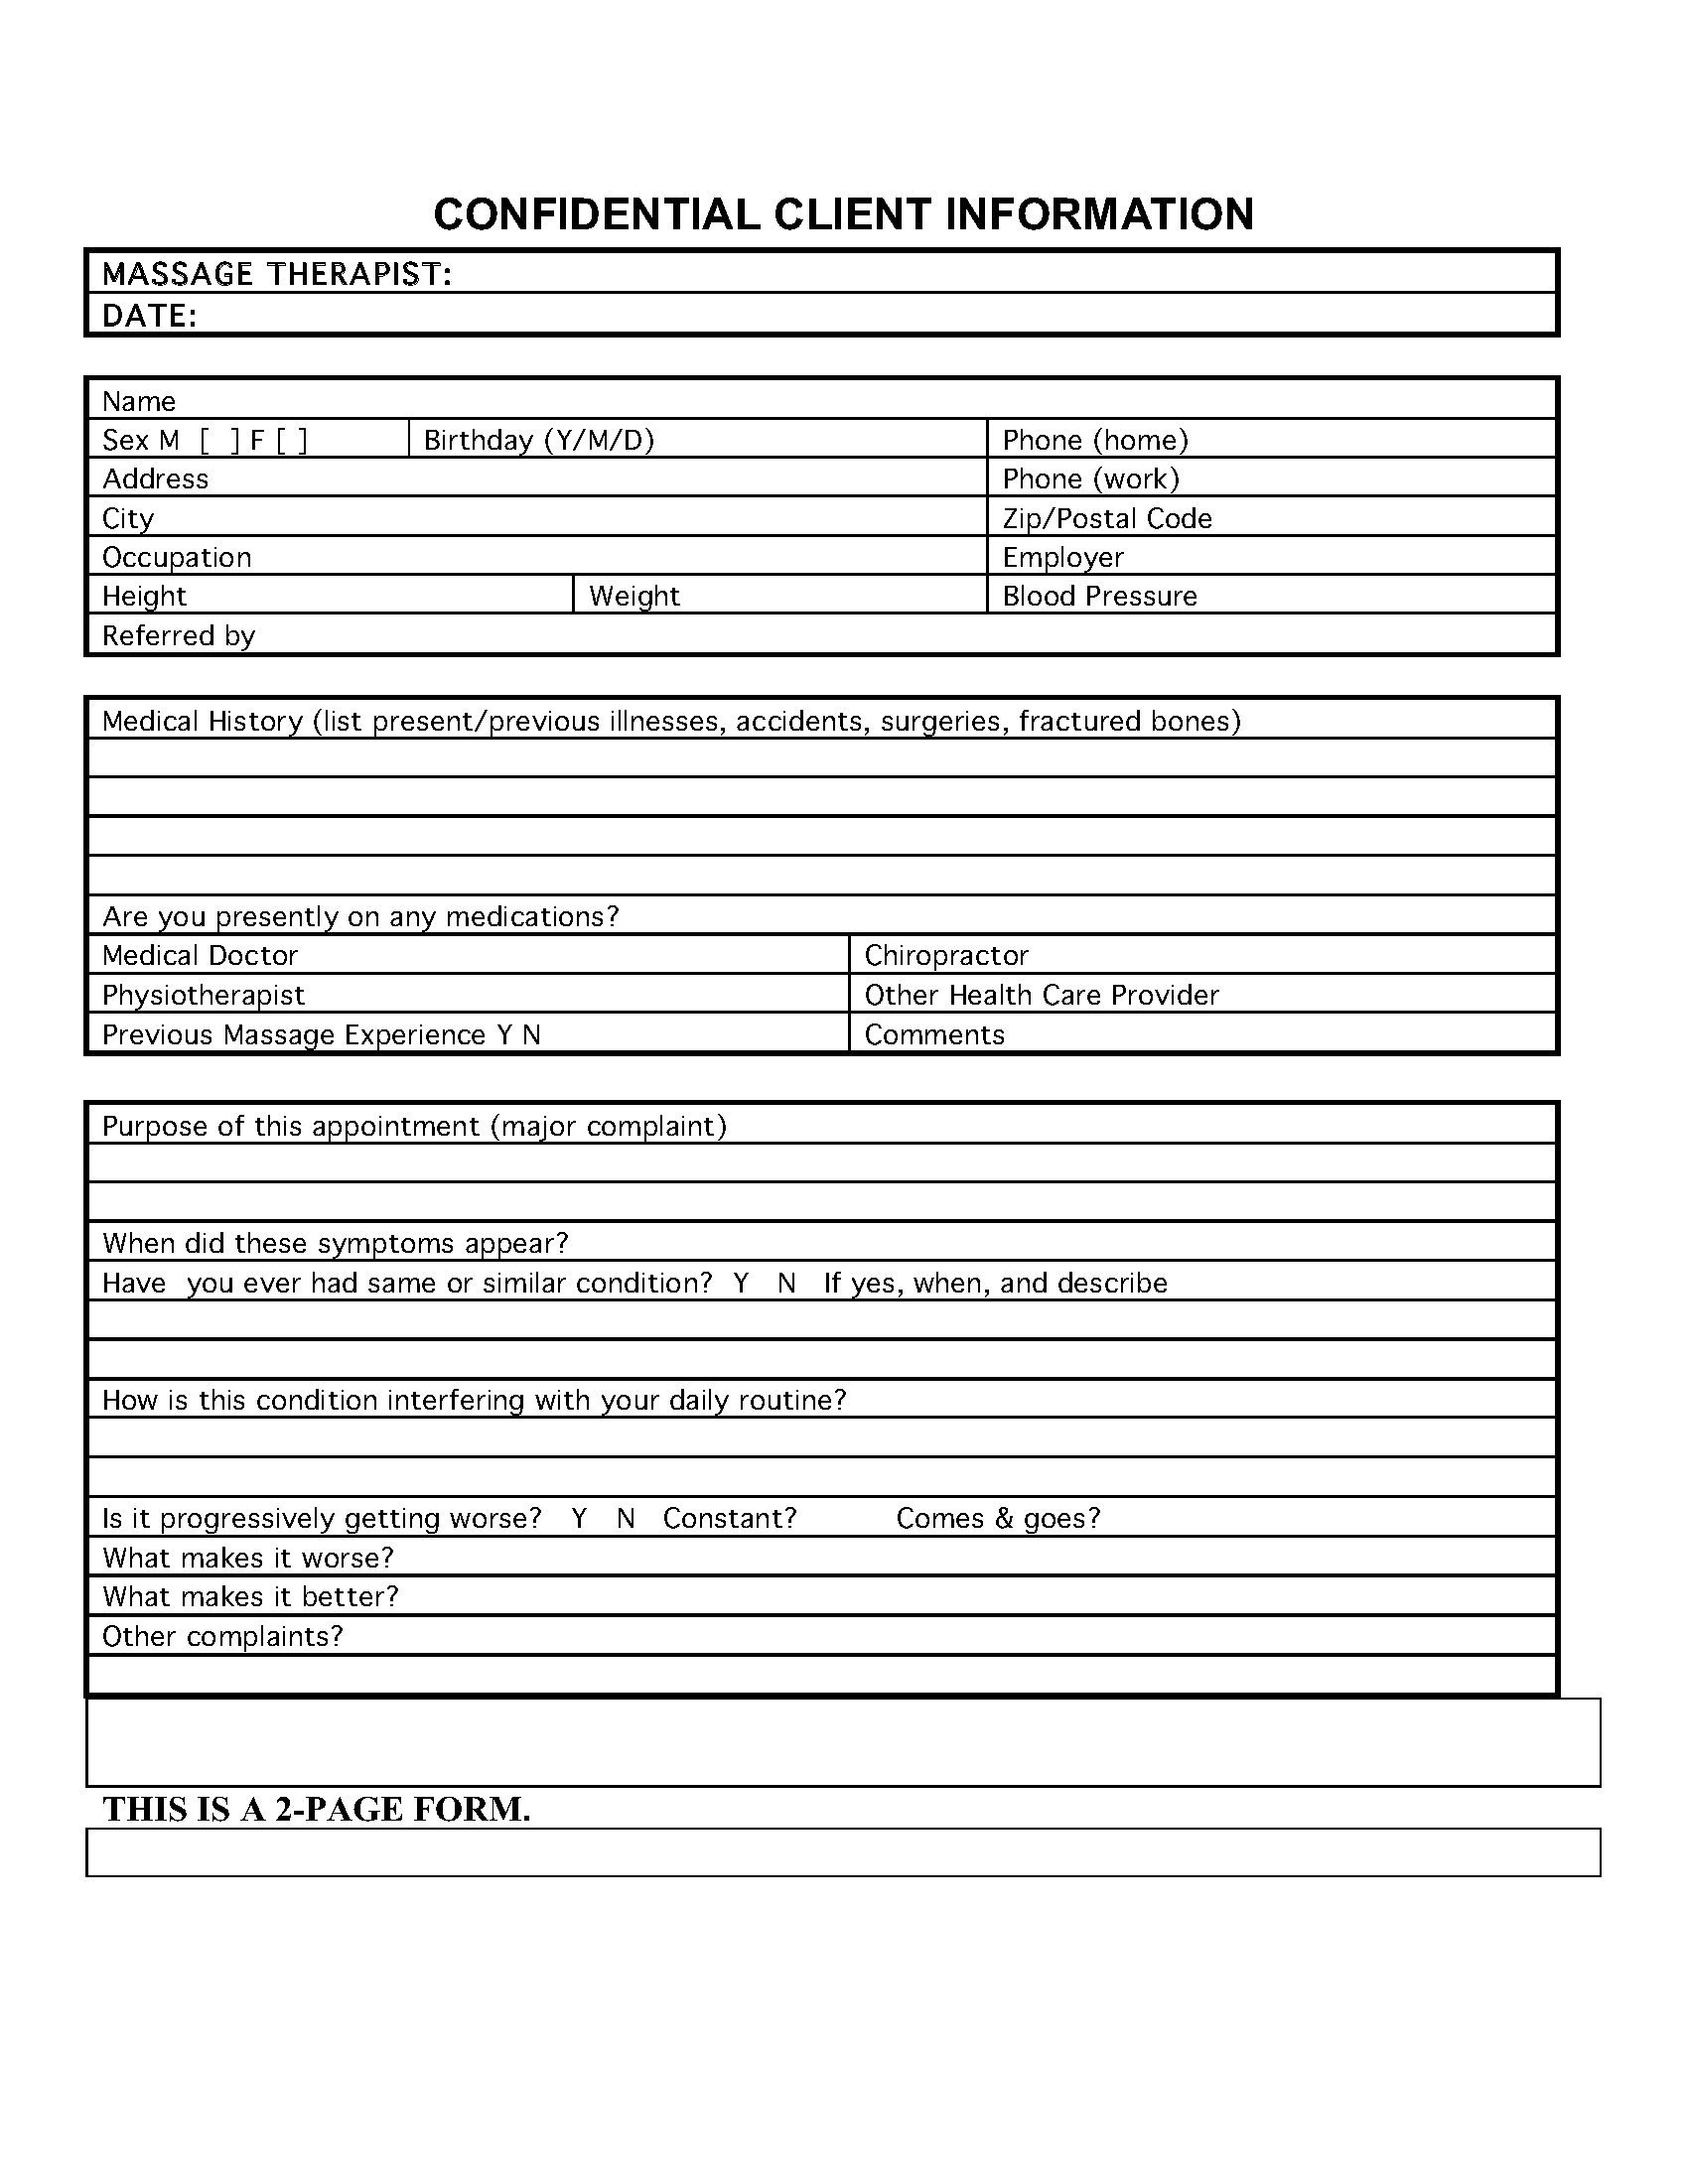 Patient Information form Template Confidential Patient Information Sheet for Massage therapy